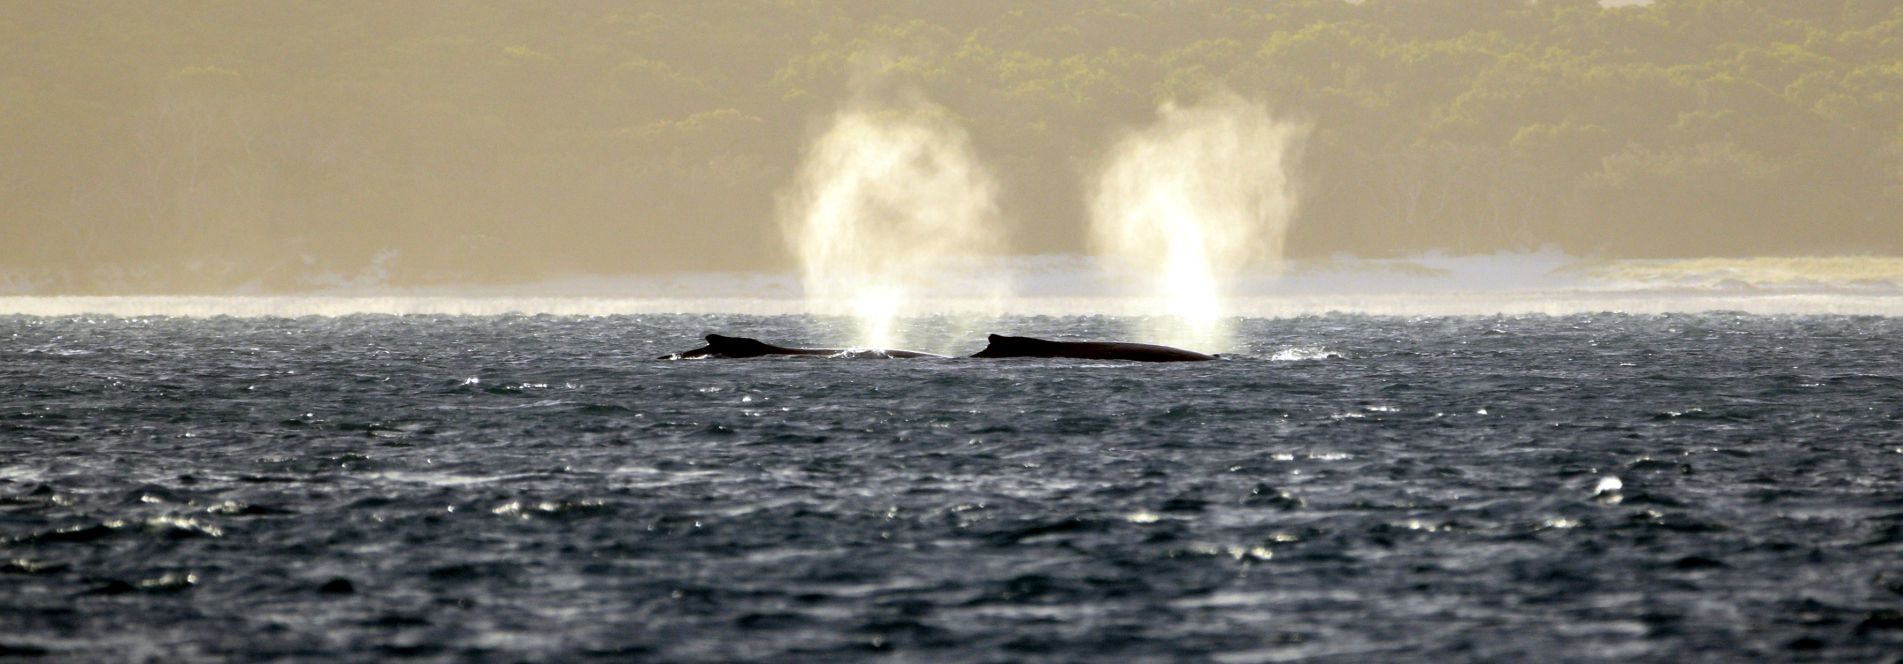 Winter is whale season in the Whitsundays, charter a bareboat and go whale watching at your leisure